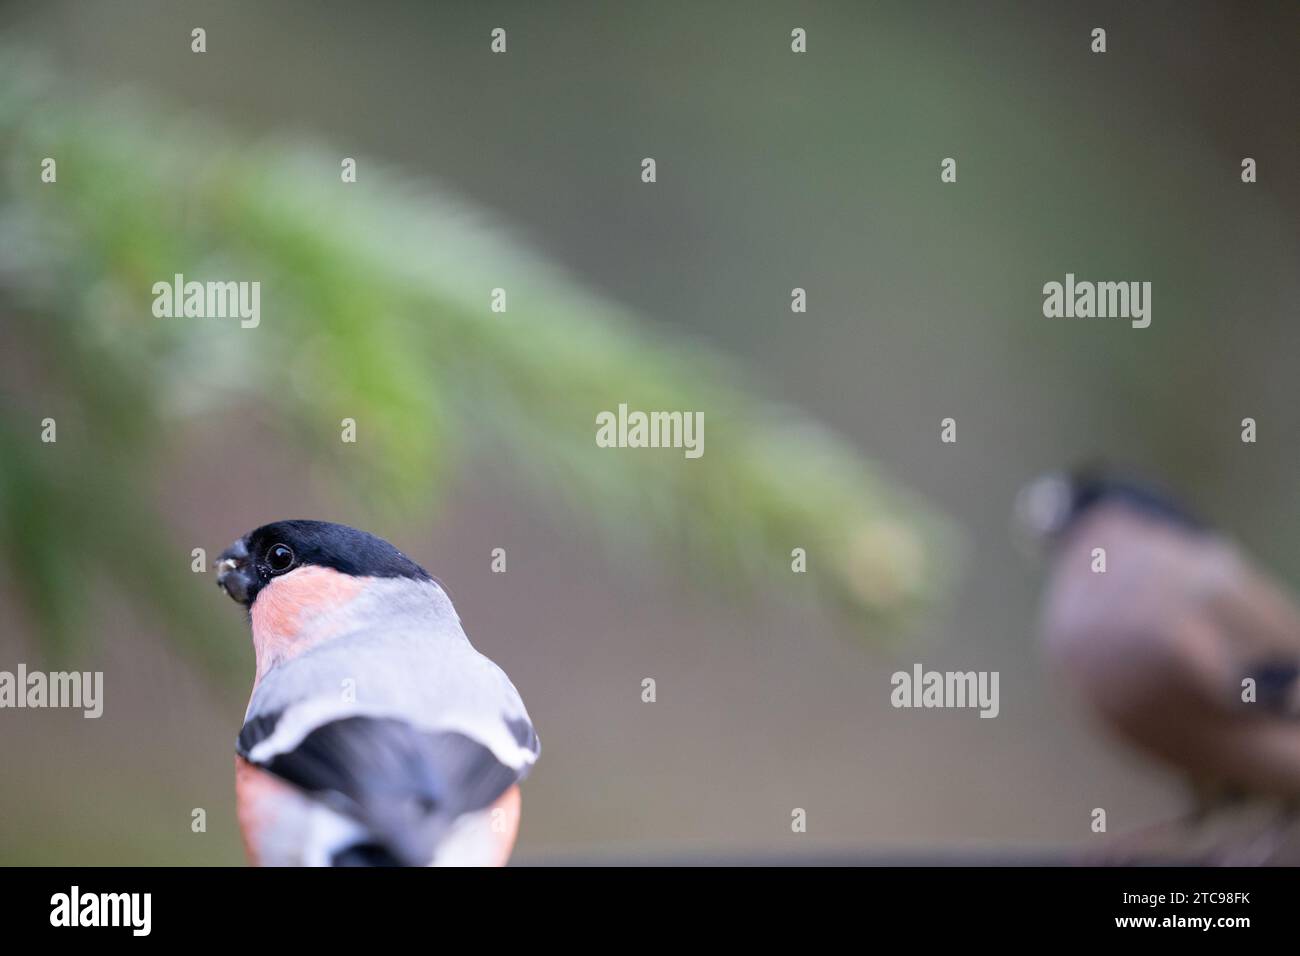 Pair of bullfinches. Bullfinch male (pyrrhula pyrrhula) in foreground, with a female bullfinch and evergreen branch in the background - Yorkshire, UK Stock Photo